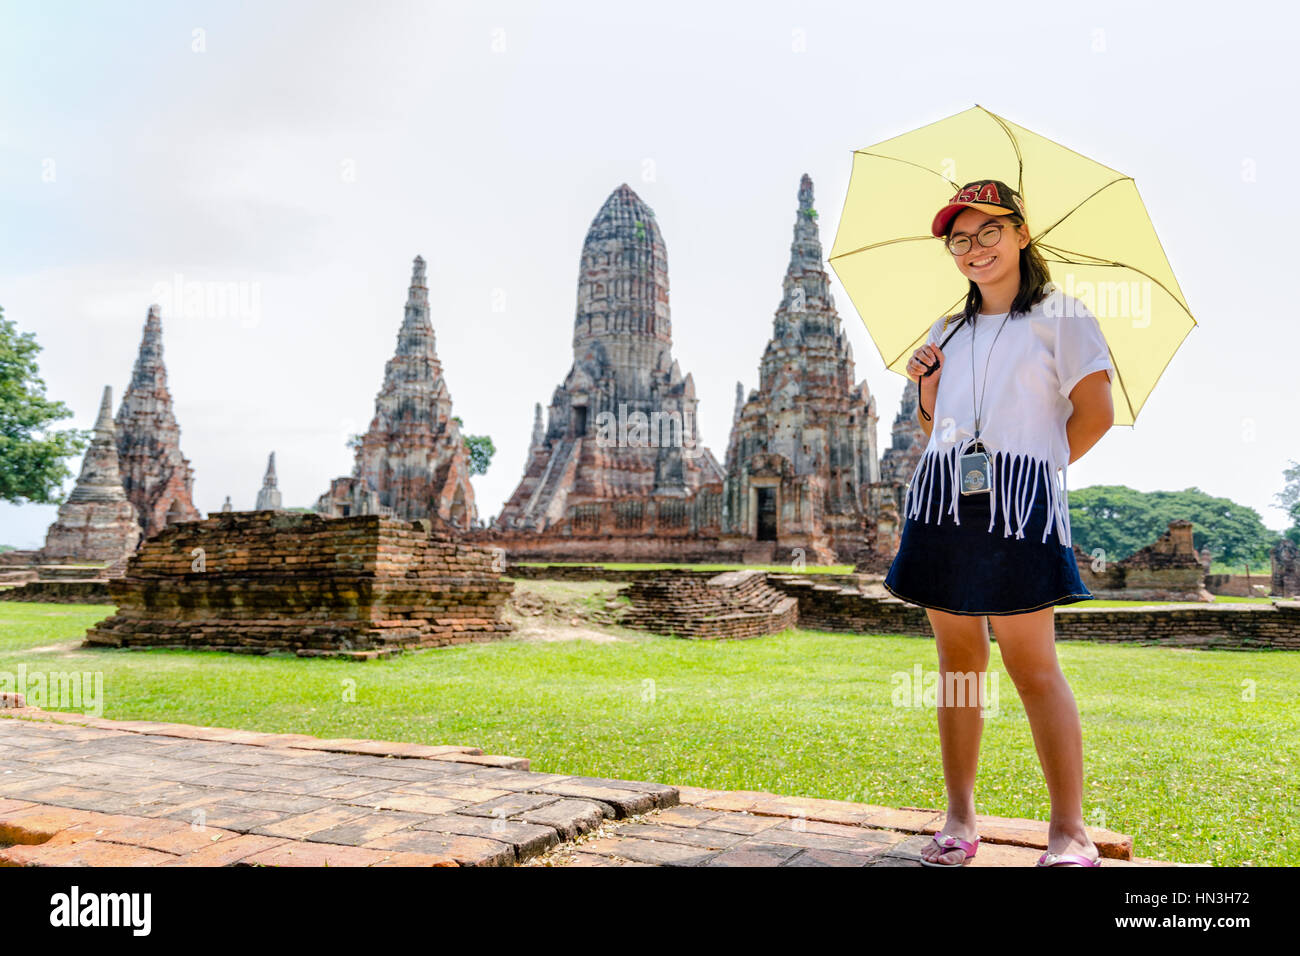 Tourist cute teenage girl wearing glasses with a camera neck, looking and smiled happily holding the umbrella on Wat Chaiwatthanaram temple background Stock Photo